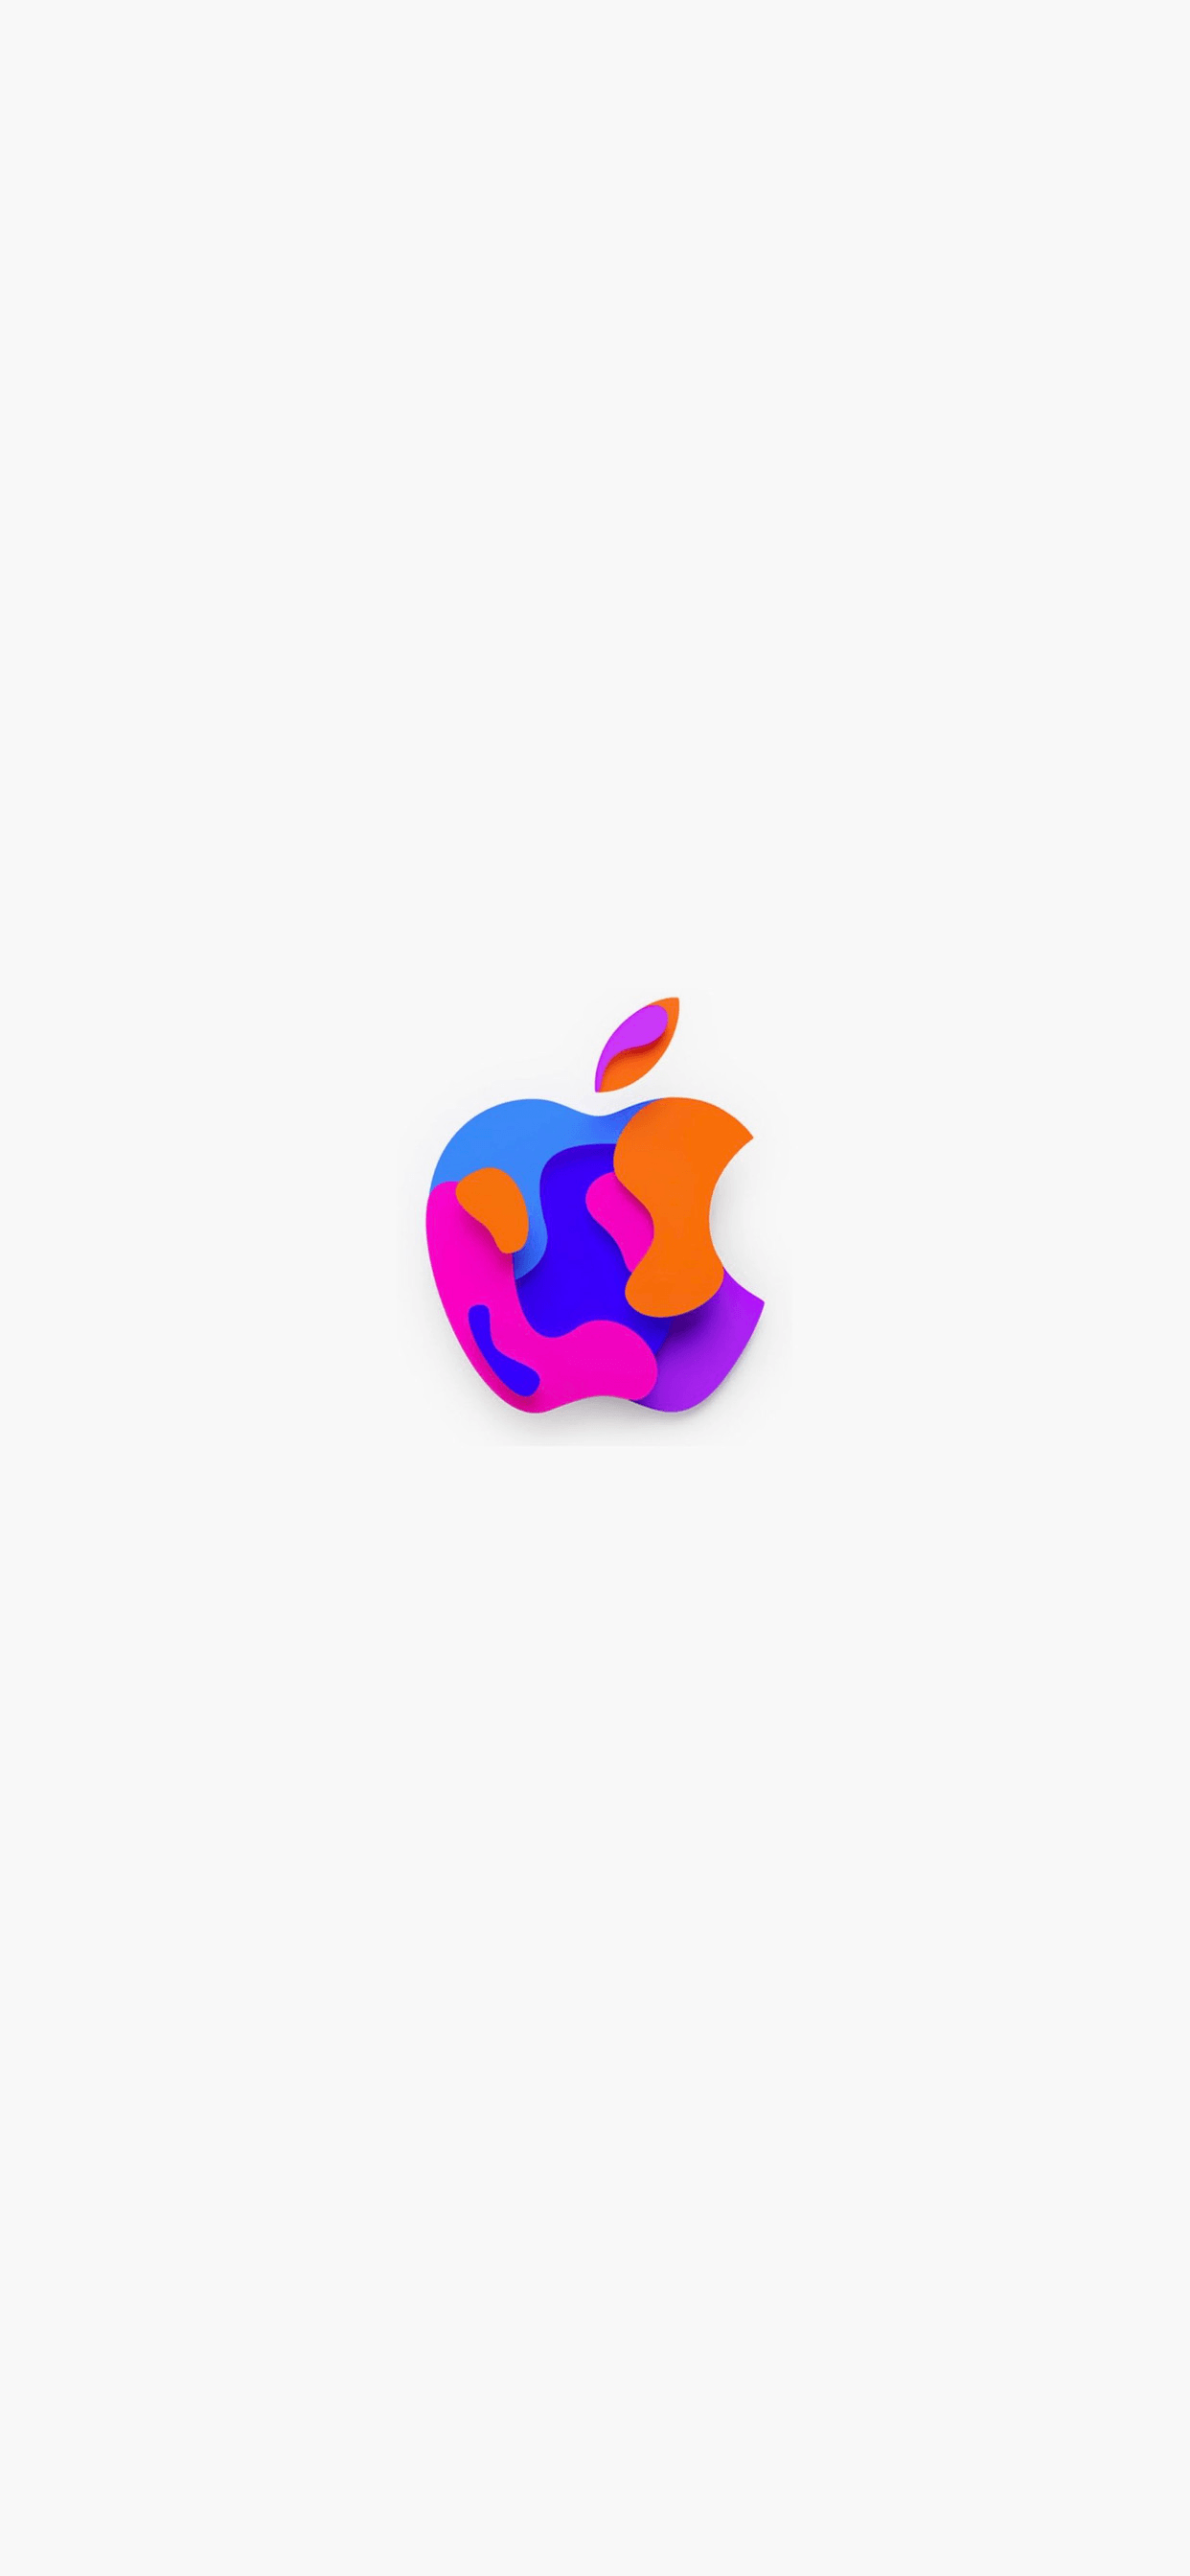 There's more in the making: 33 Apple logo wallpaper